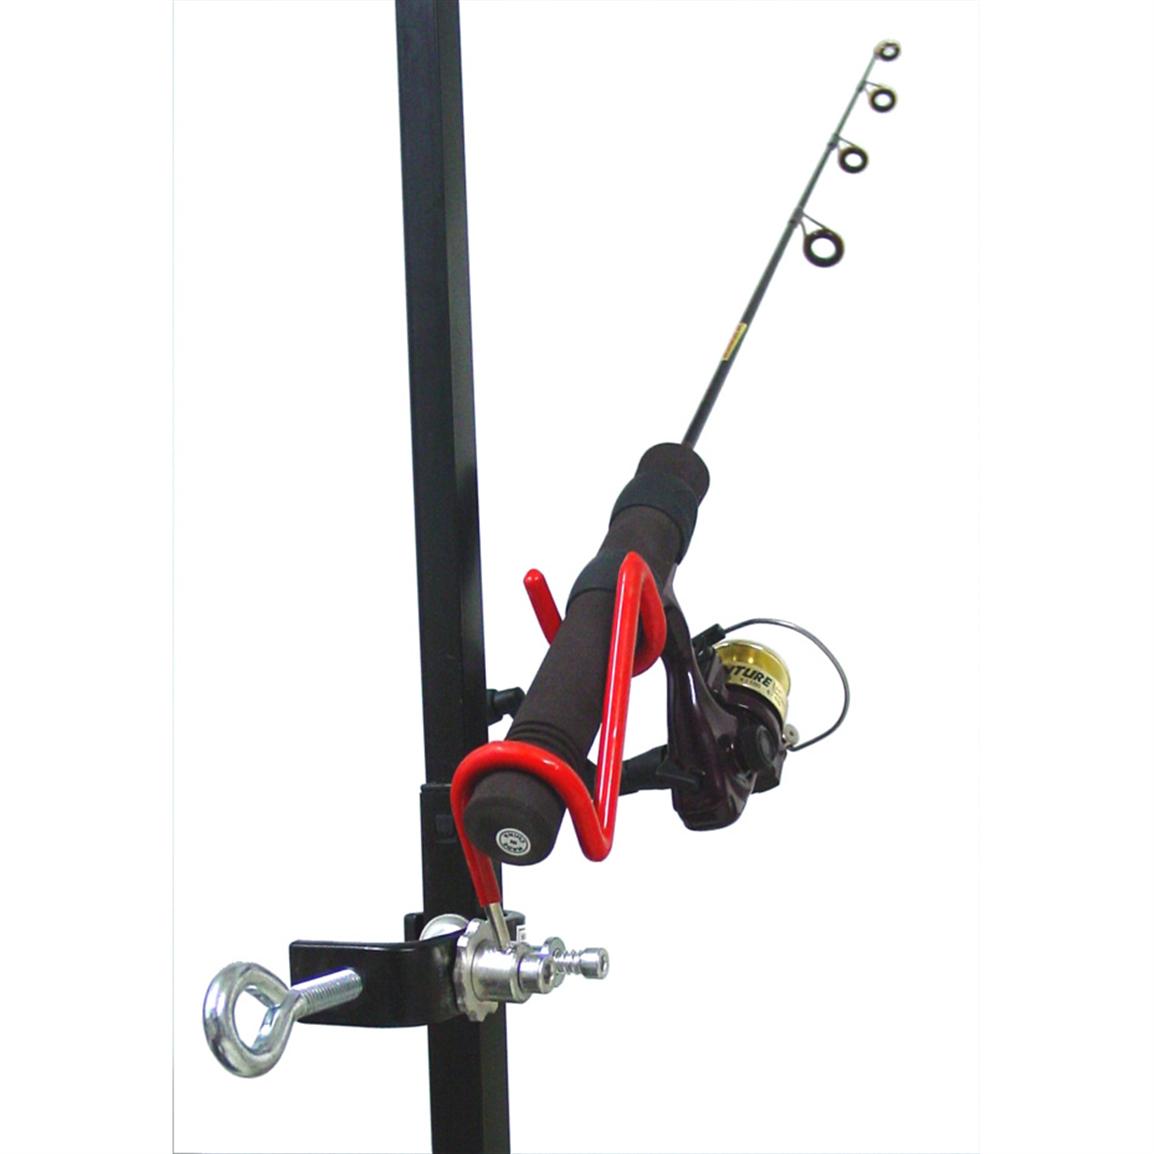 Shelter Ice Rod Holder 117220, Ice Fishing Gear at